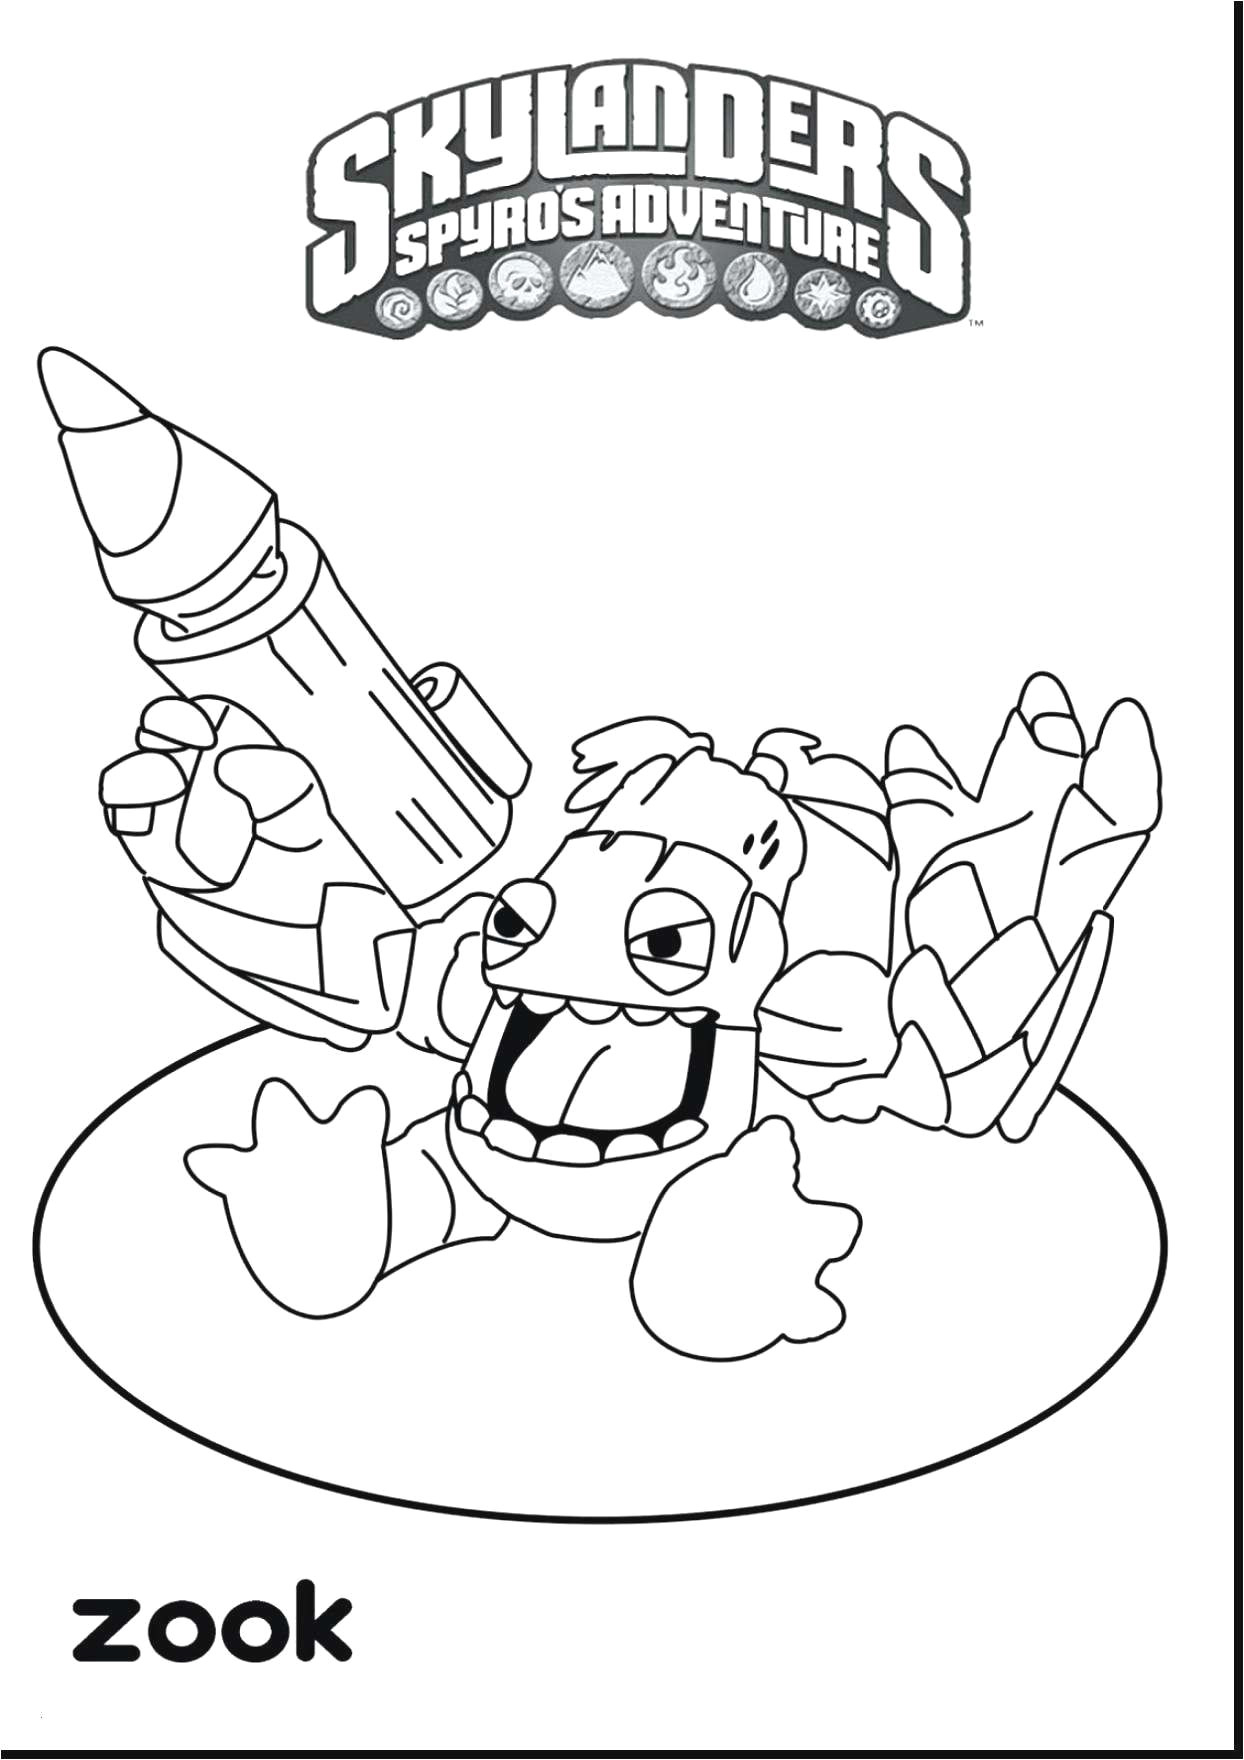 Story Coloring Pages Coloring Pages Best Free Bible Coloring Pages Download Of Toy